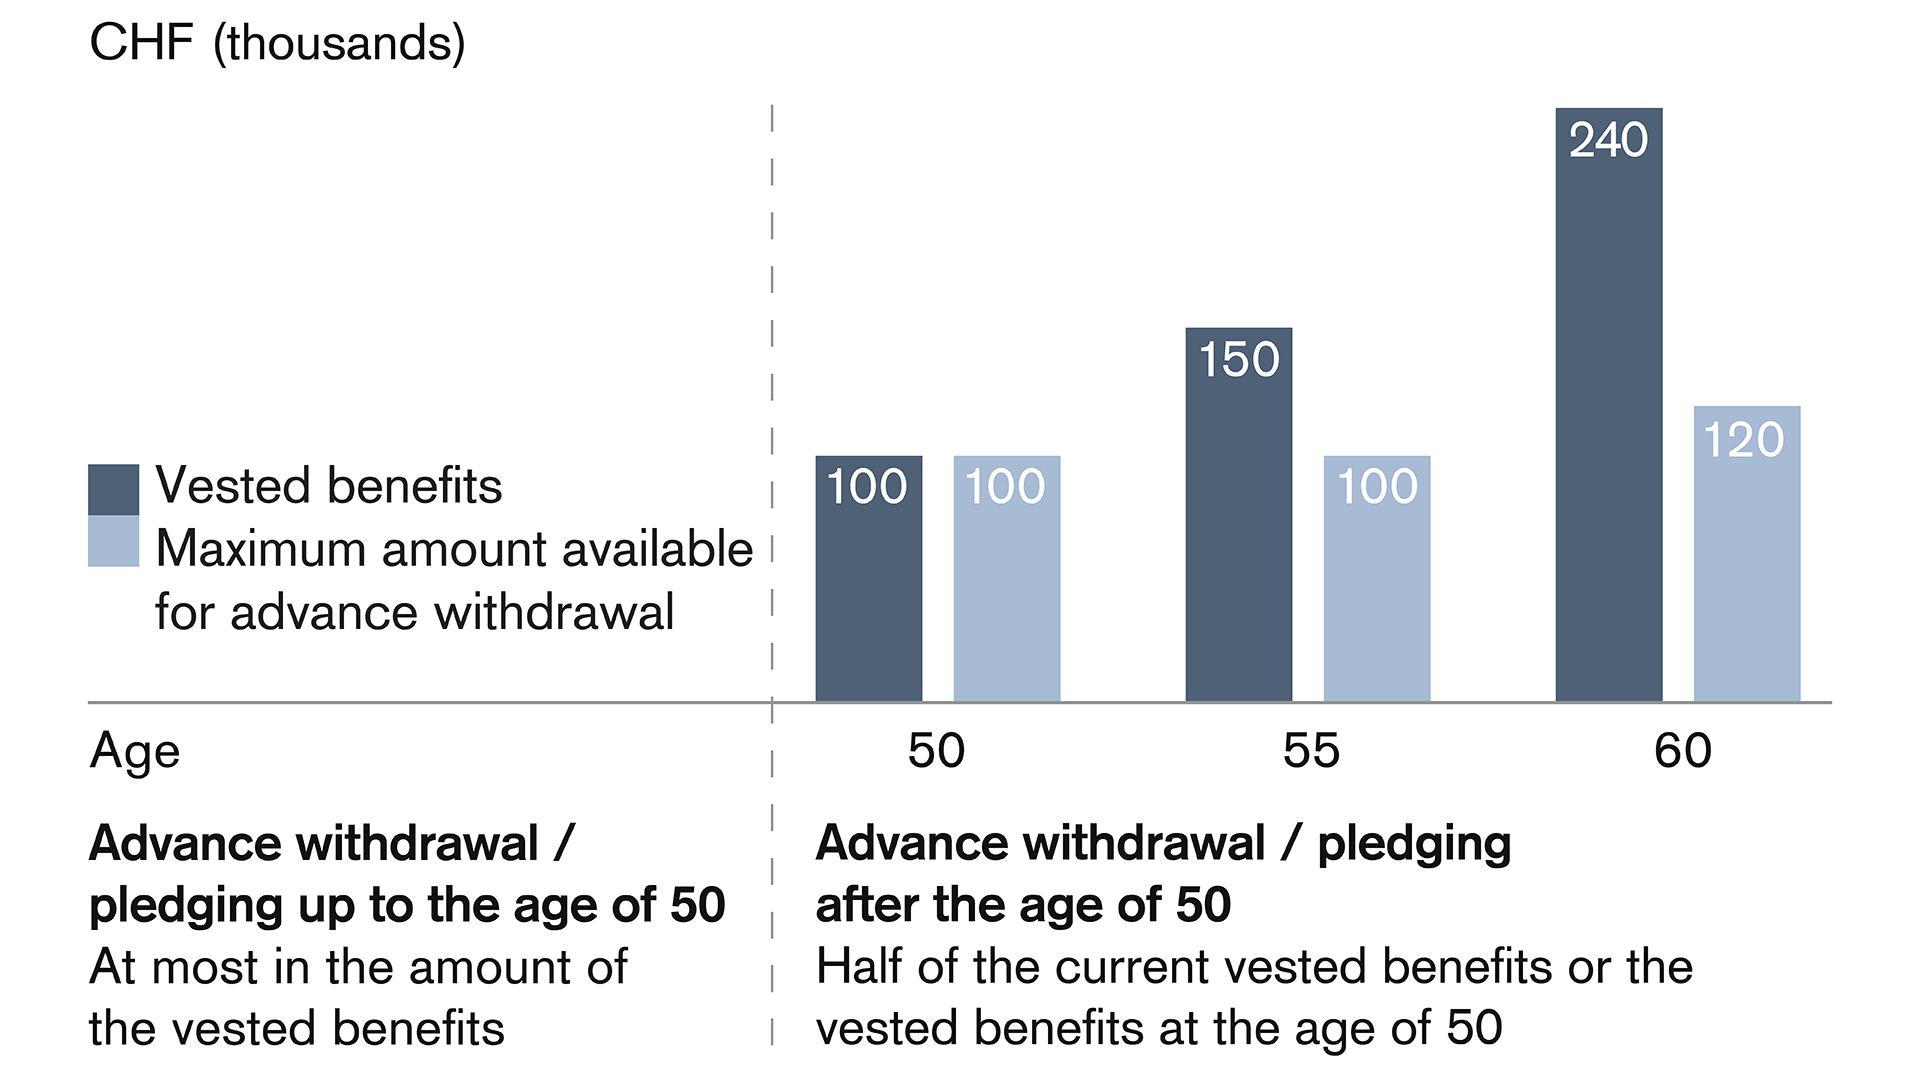 Maximum amount for advance withdrawal or pledging from the pension fund